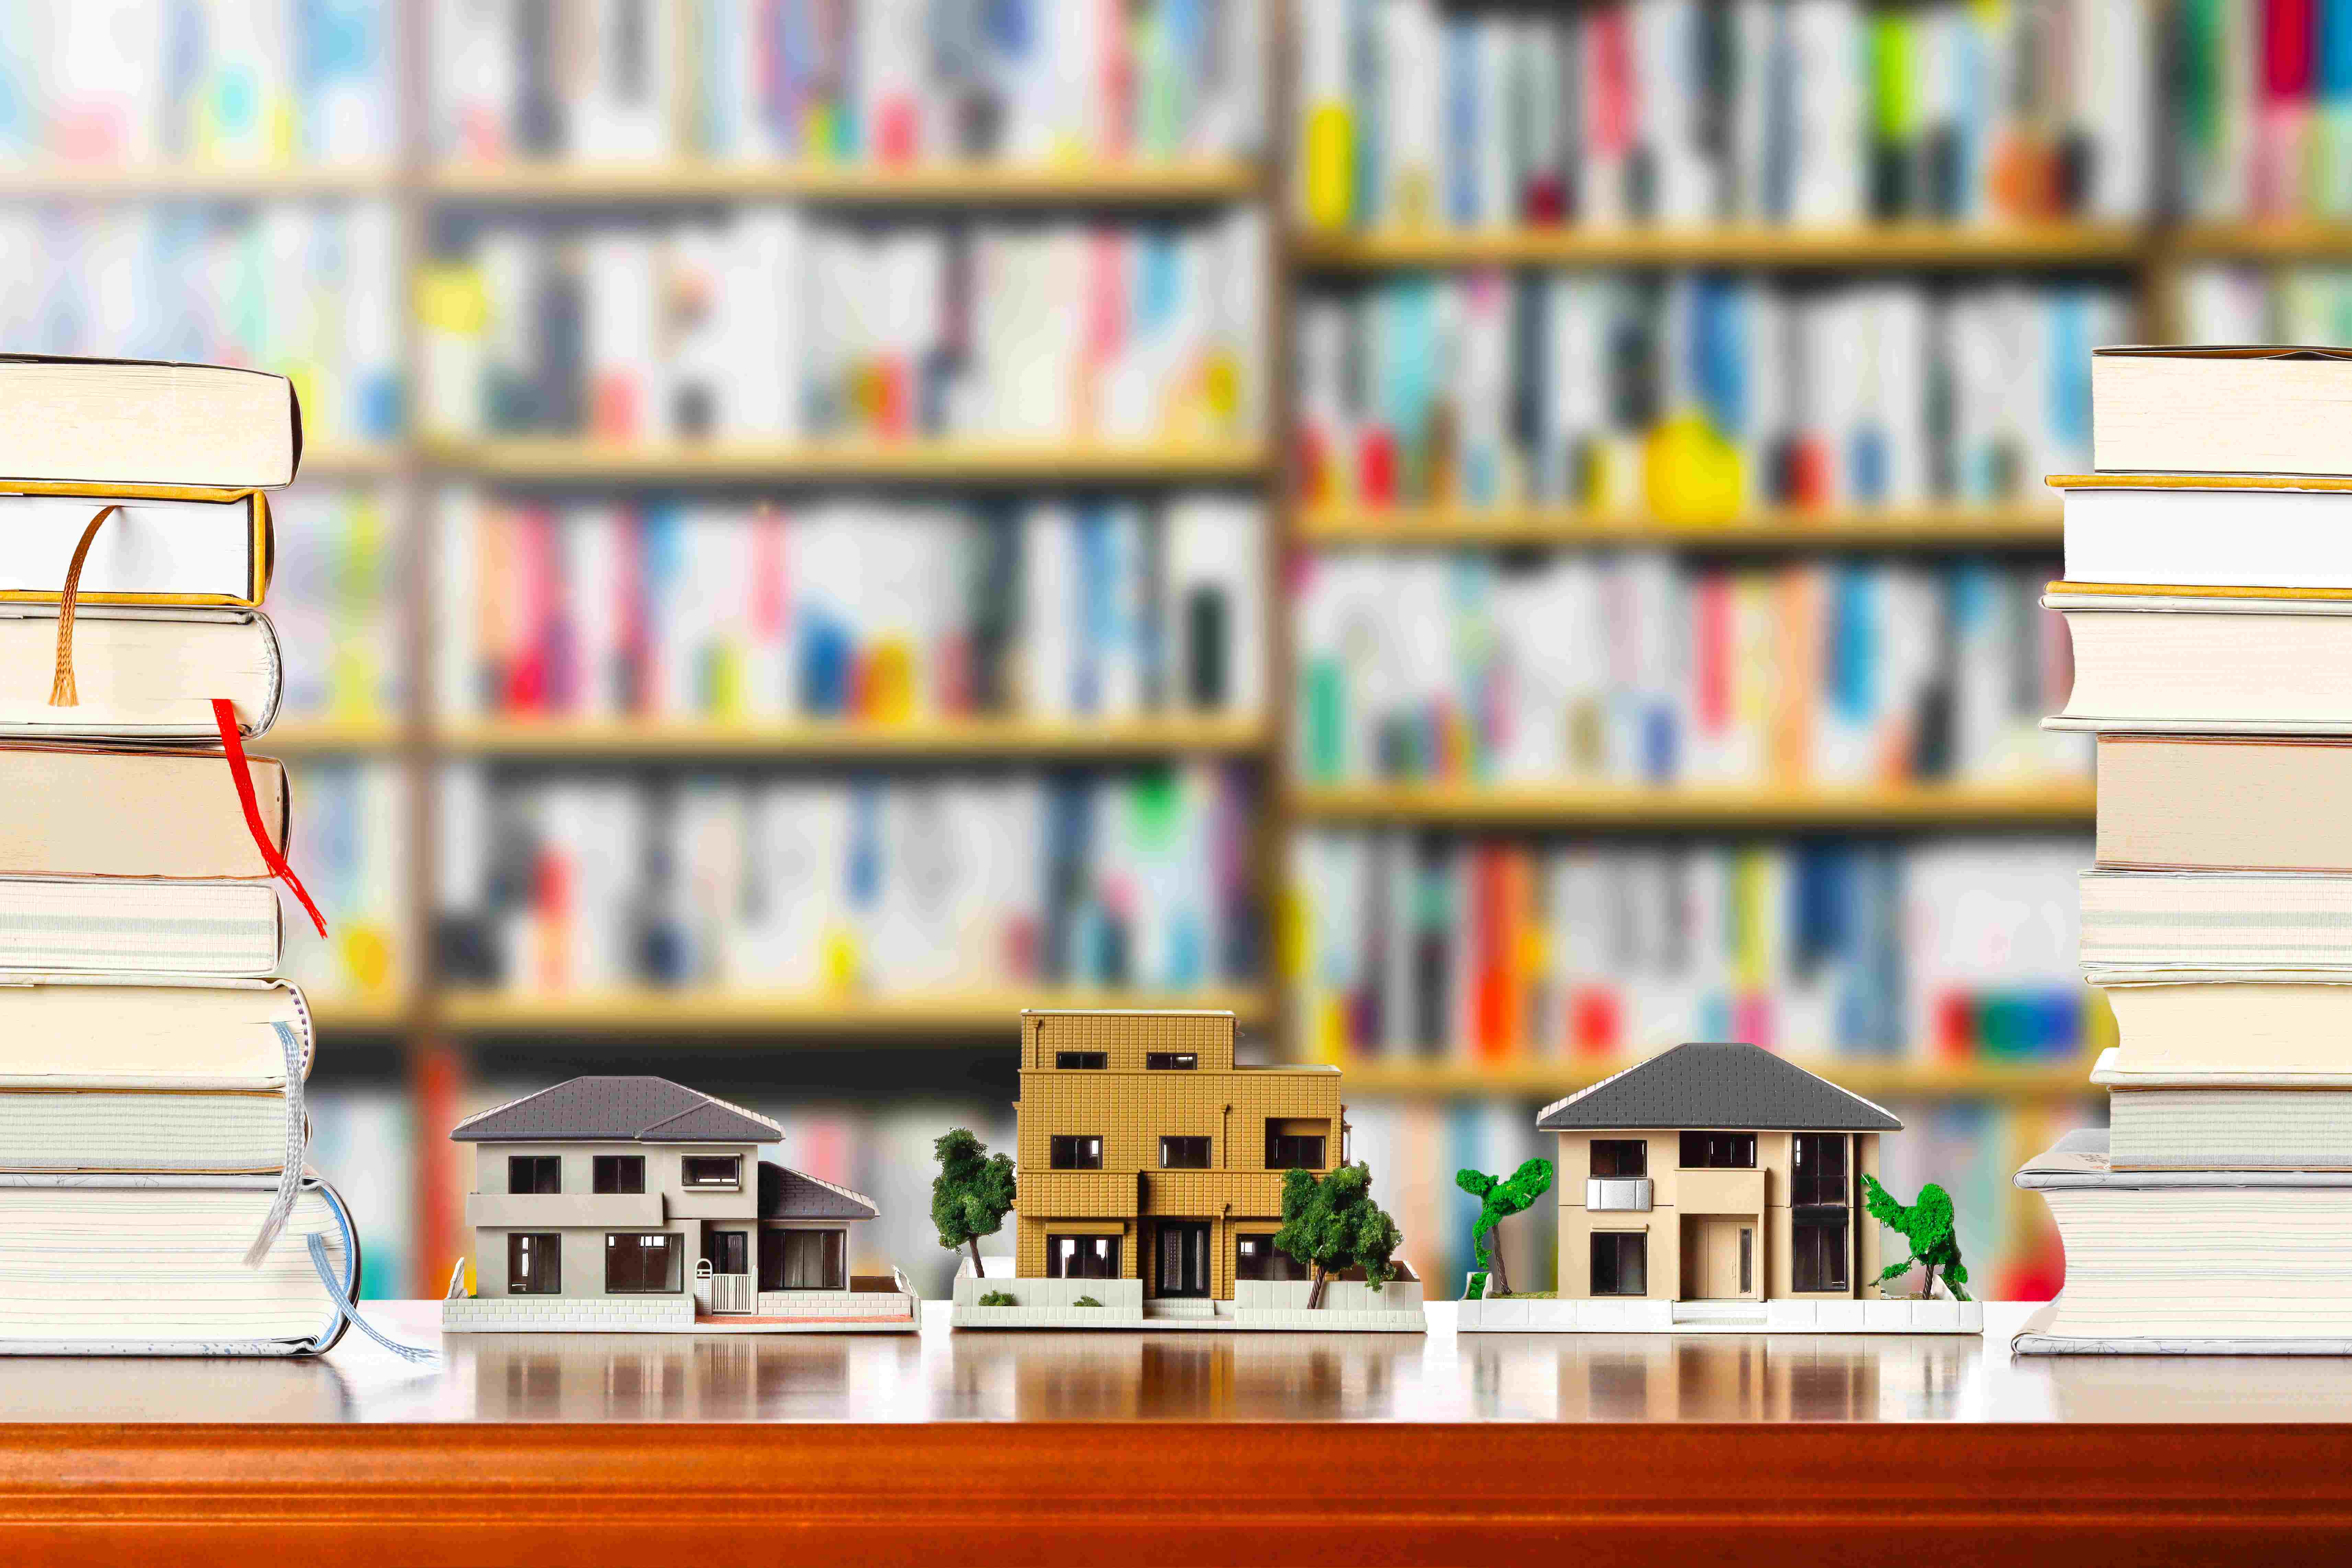 House models and stack of books on the table with blurry background